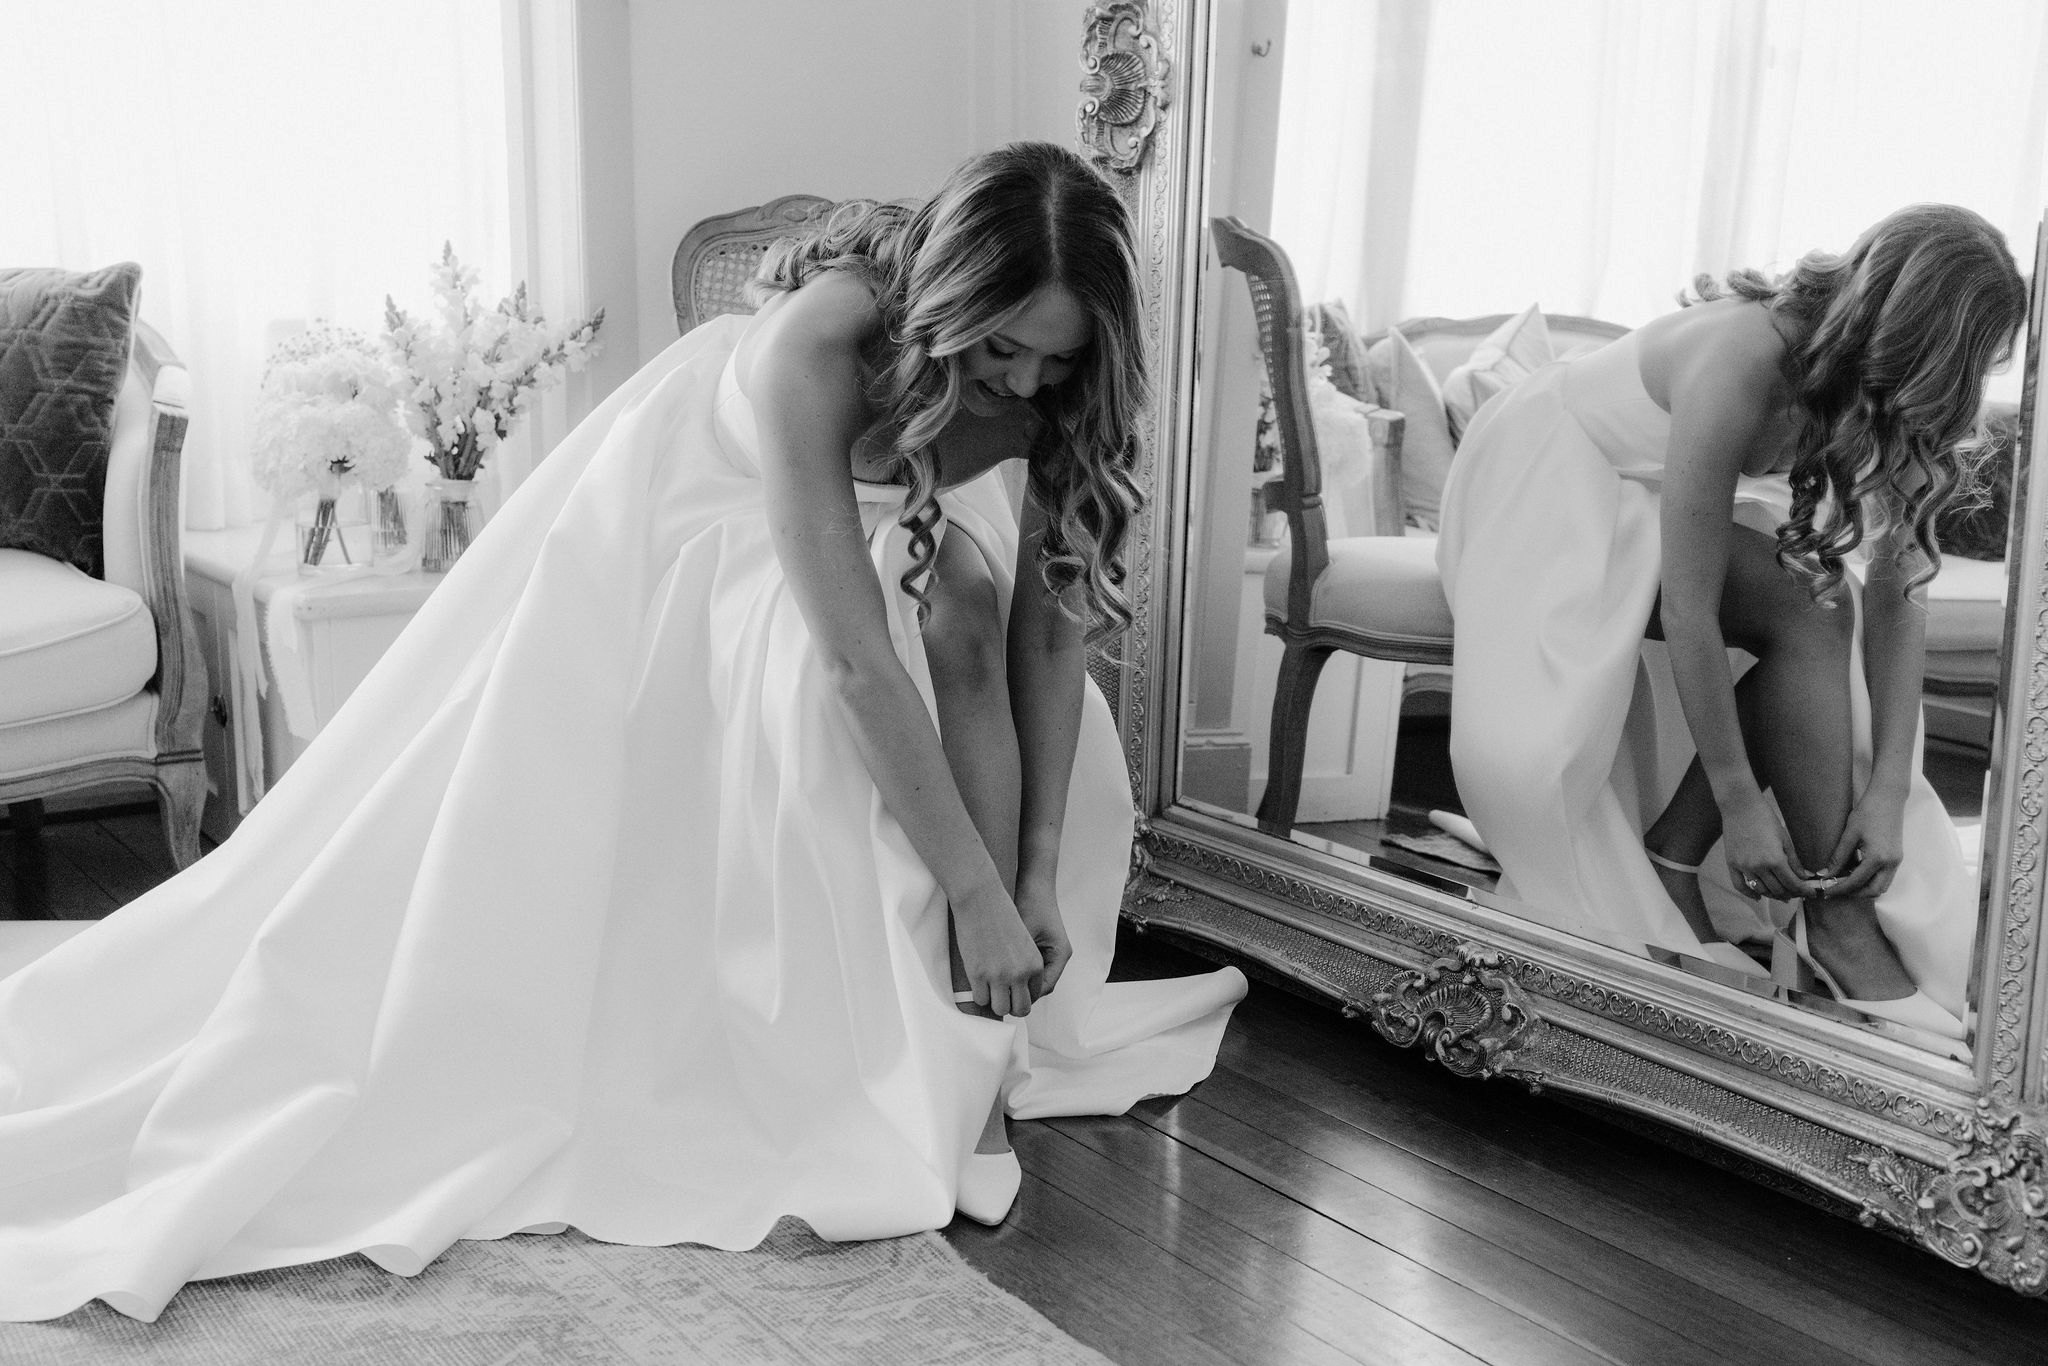 Bride putting on wedding shoes